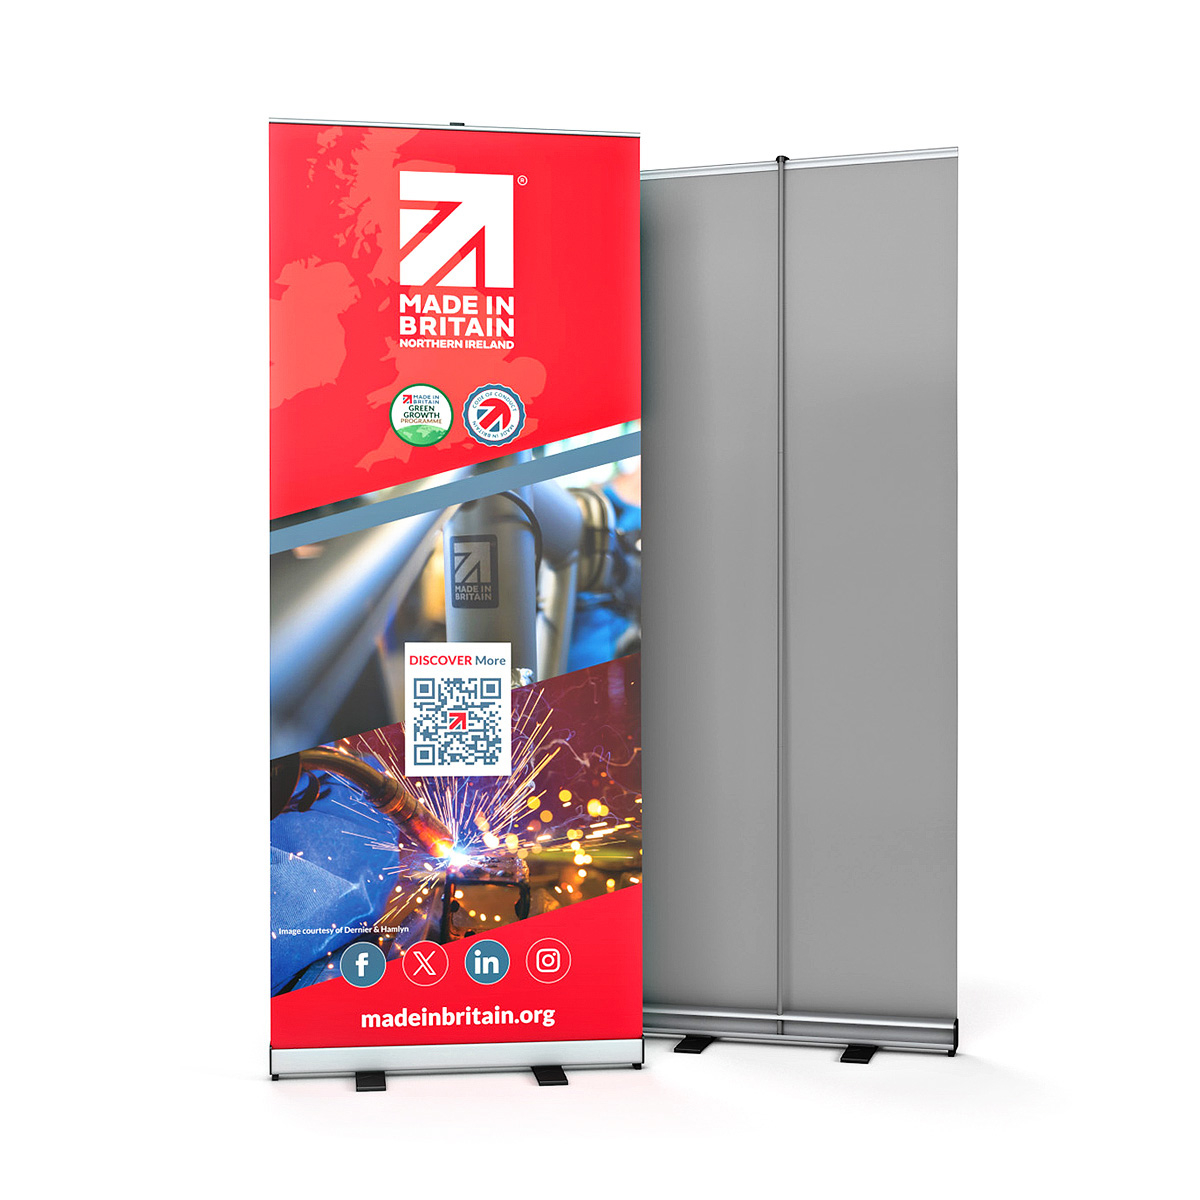 ENVOY® Roller Banner. Buy Pull Up Banners and Roller Banner Printing at Trade Prices From XL Displays. Next Day Dispatch. Printed in the UK. ENVOY® Pop Up Banners Include Custom Print, Banner Stand Hardware and Padded Carry Bag. 